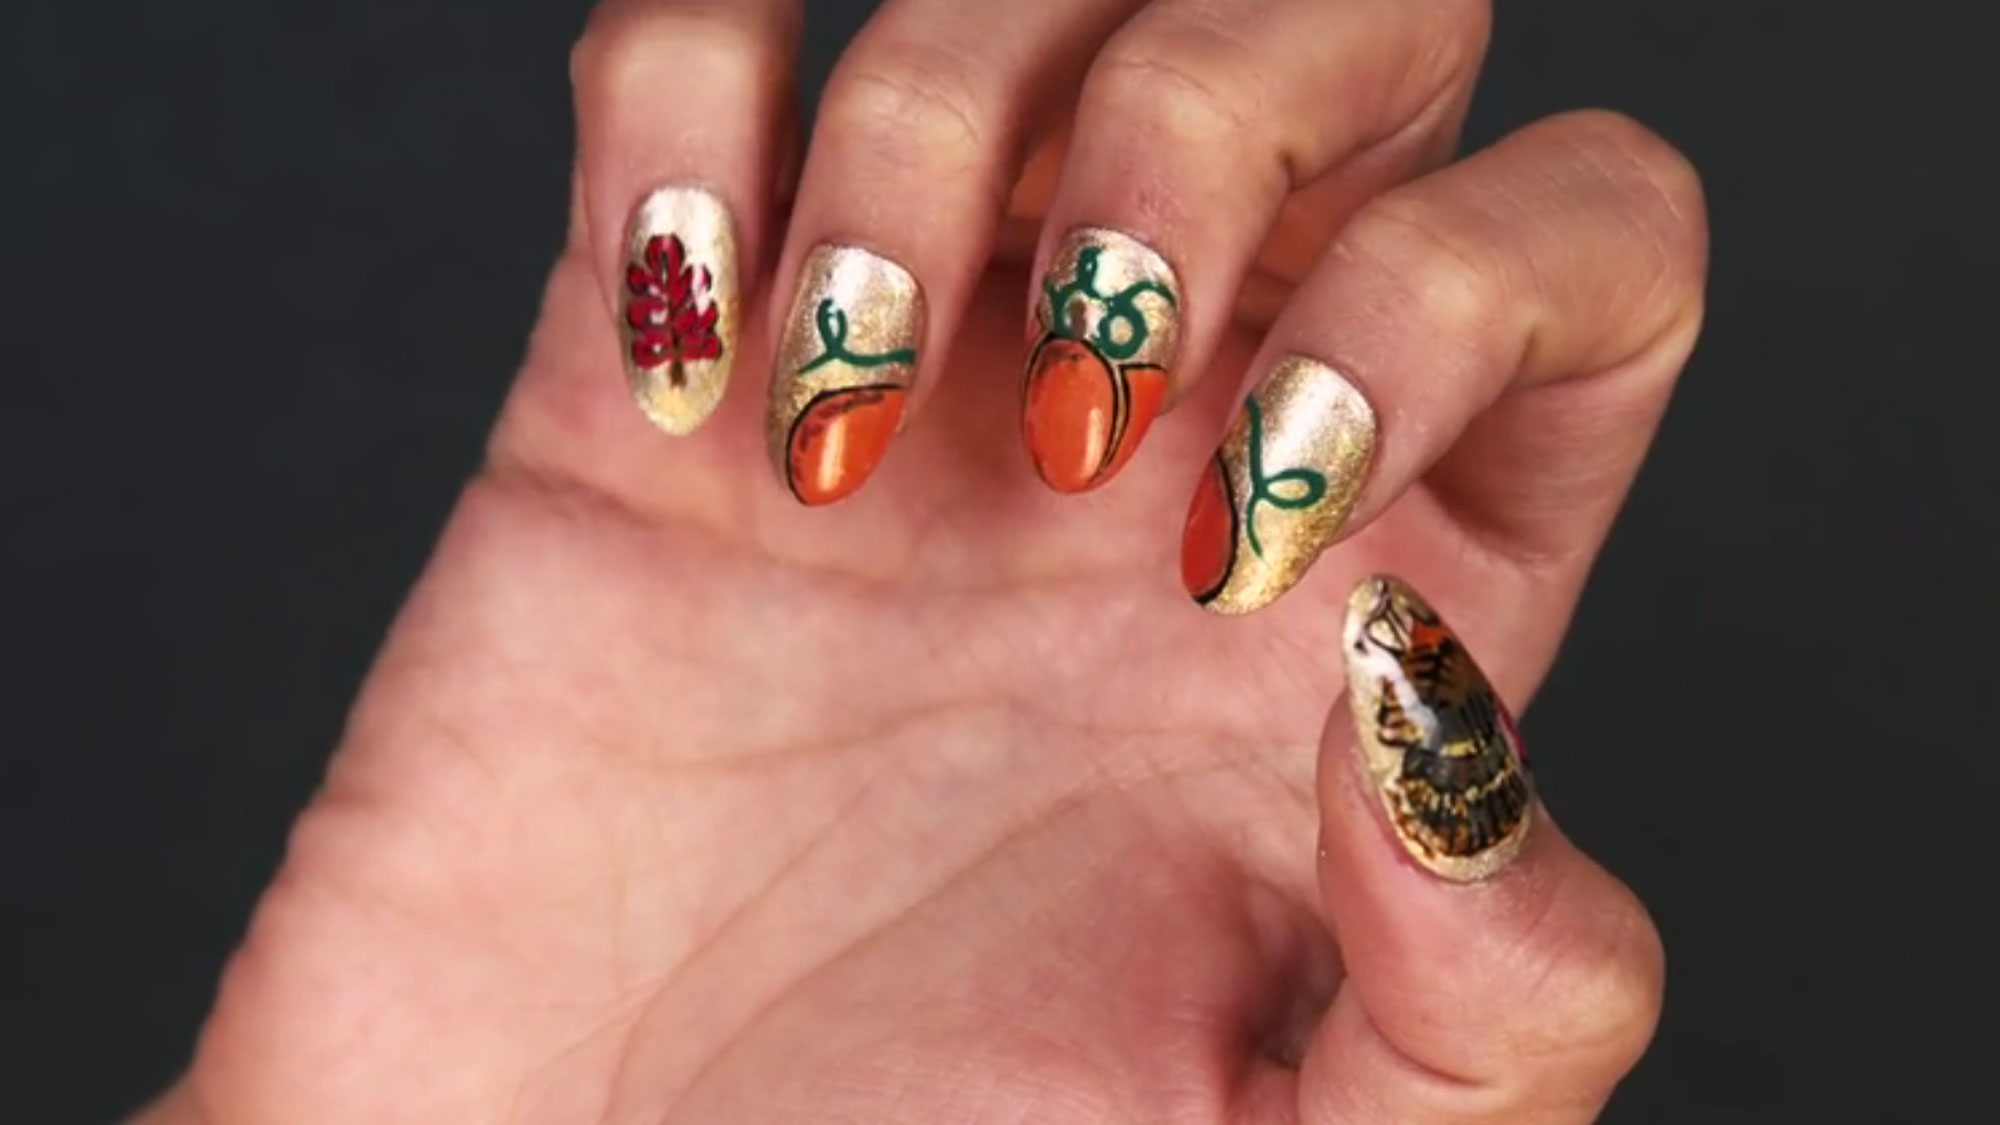 10. "Festive Fall Nail Art for Thanksgiving" - wide 6